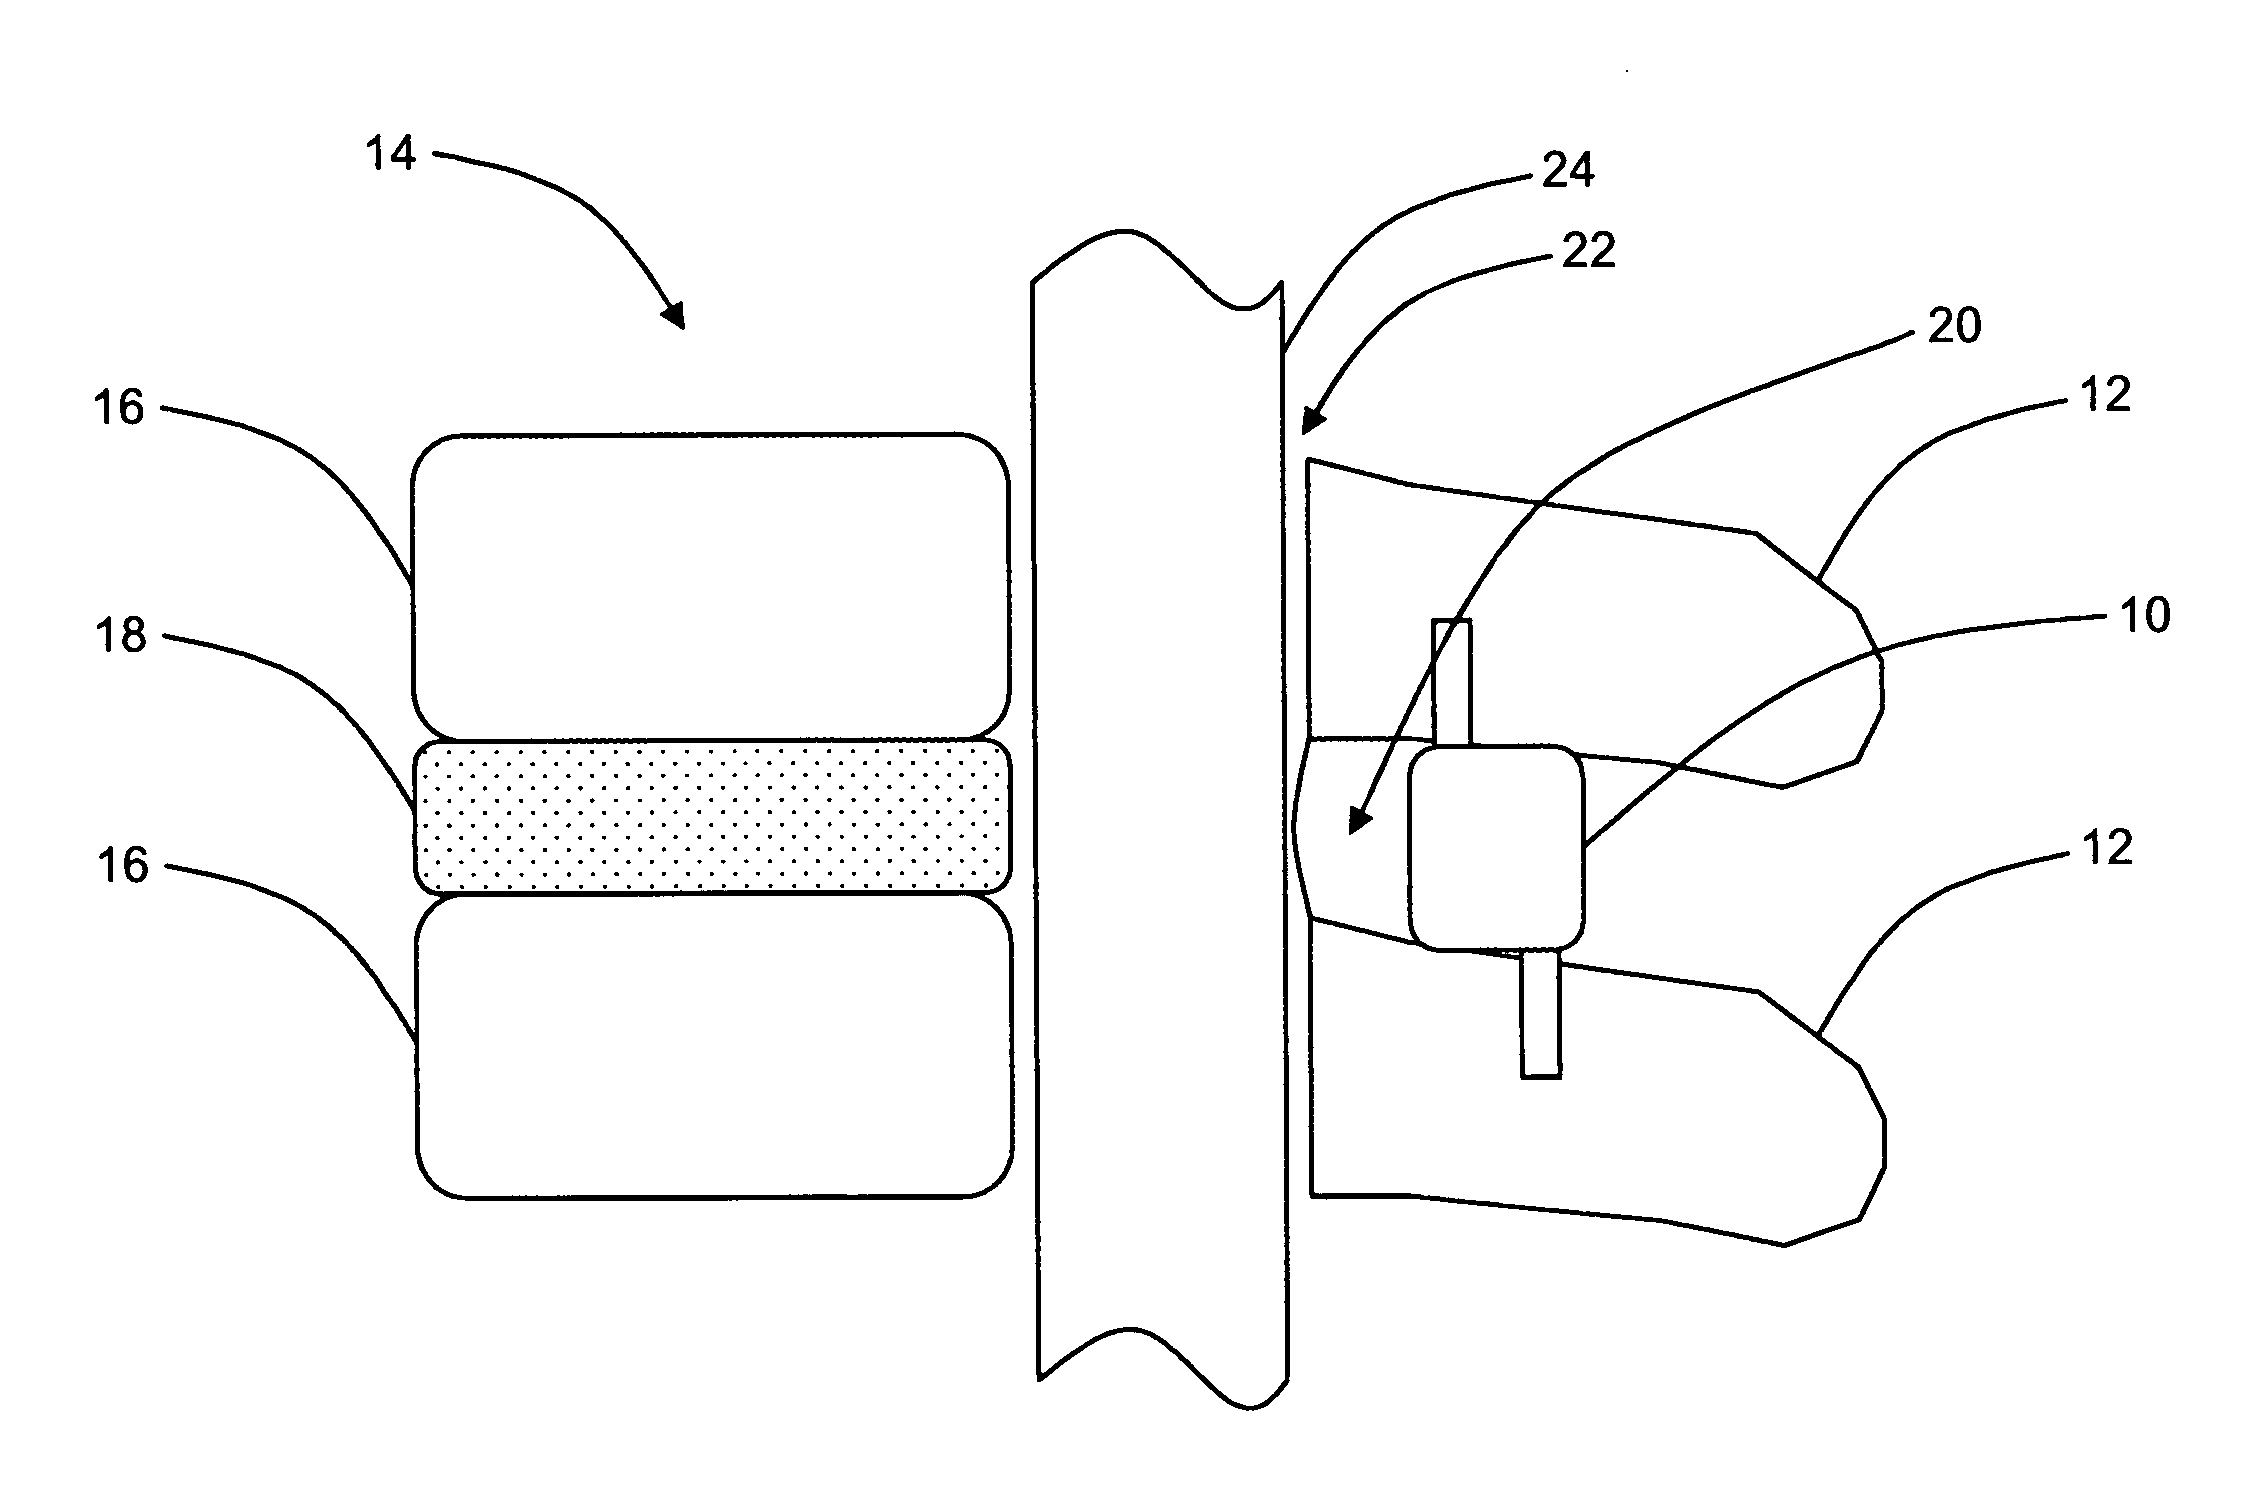 Interspinous distraction devices and associated methods of insertion